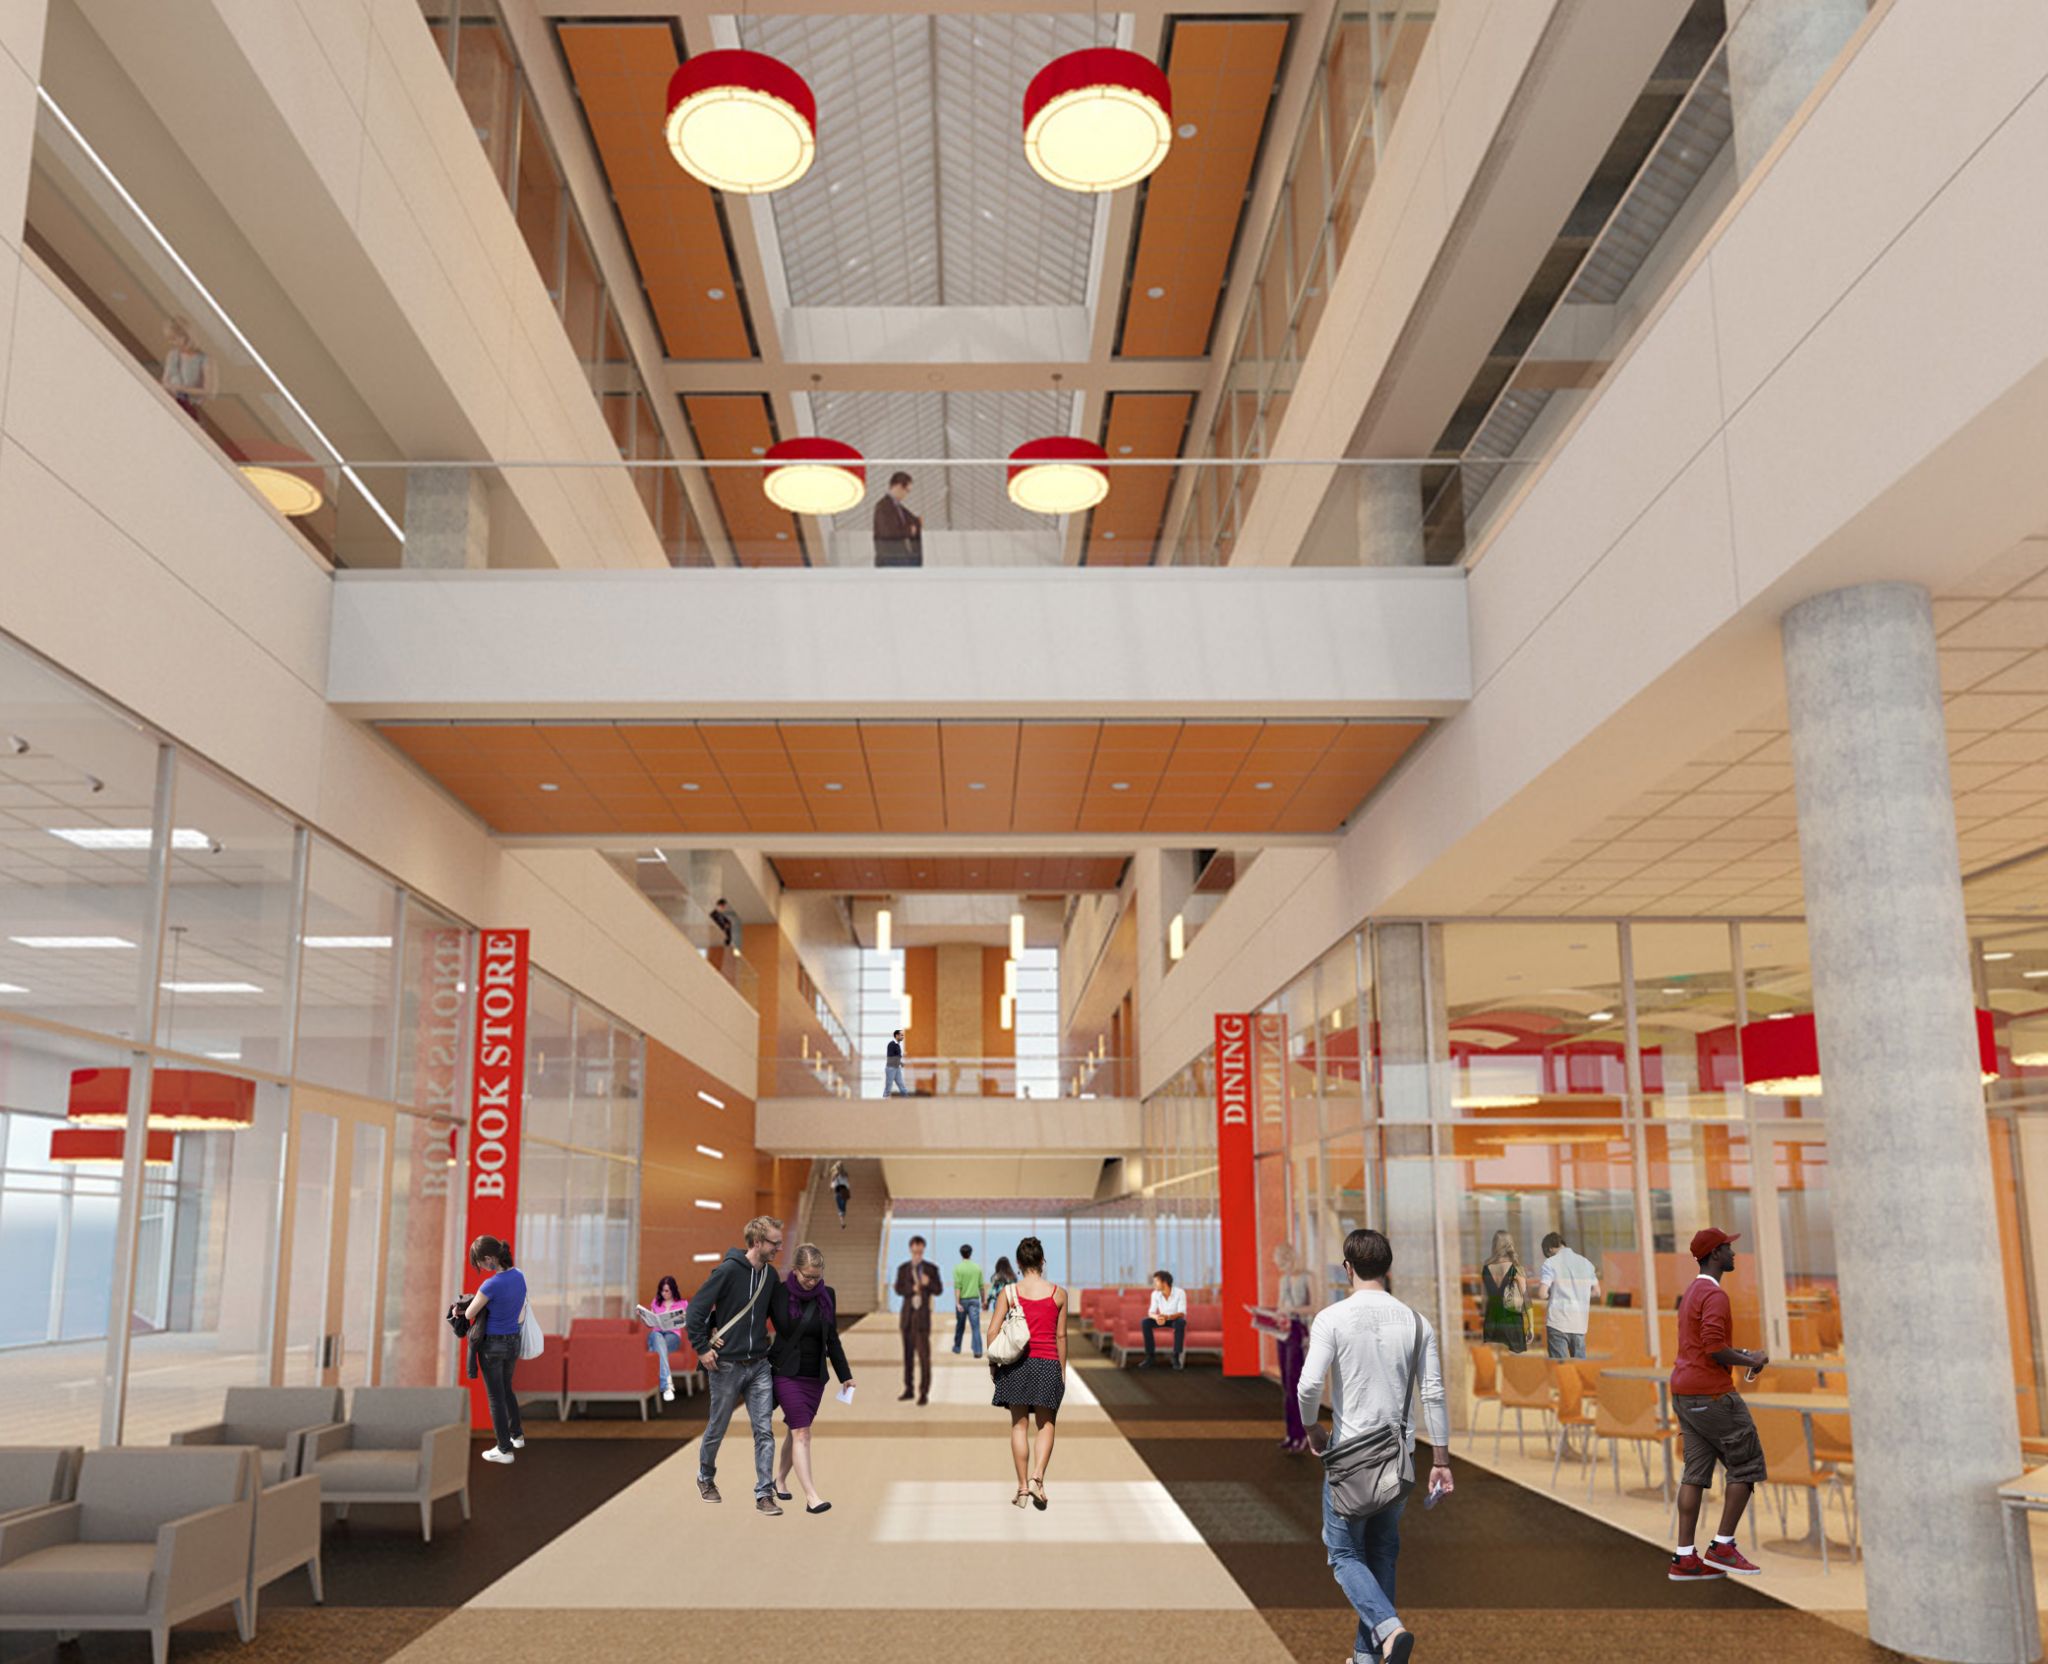 Demolished UIW student center, dorm looks heartbreaking, but $25 million  upgrades include a pub